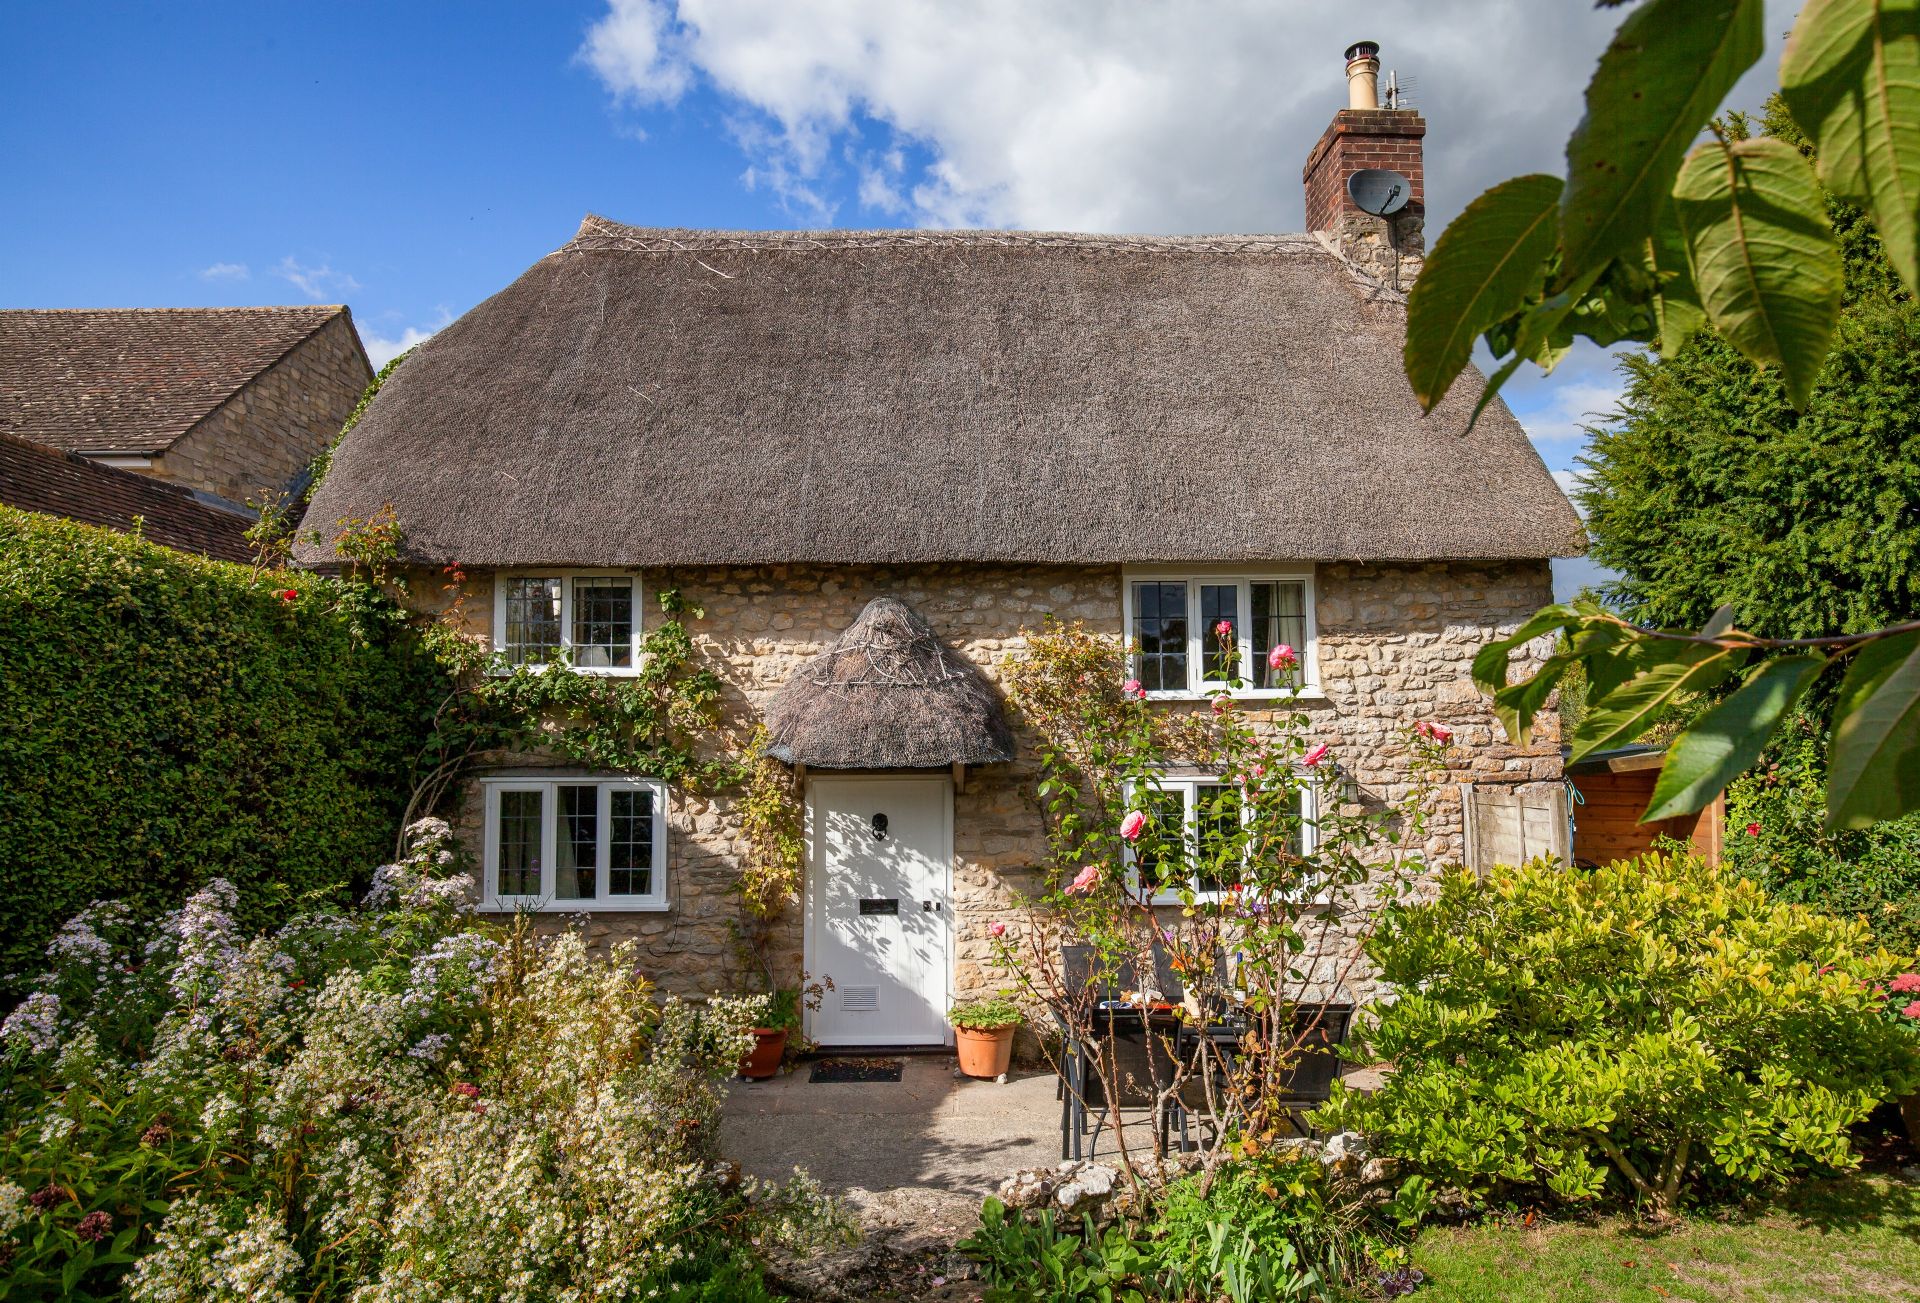 Details about a cottage Holiday at Snowdrop Cottage